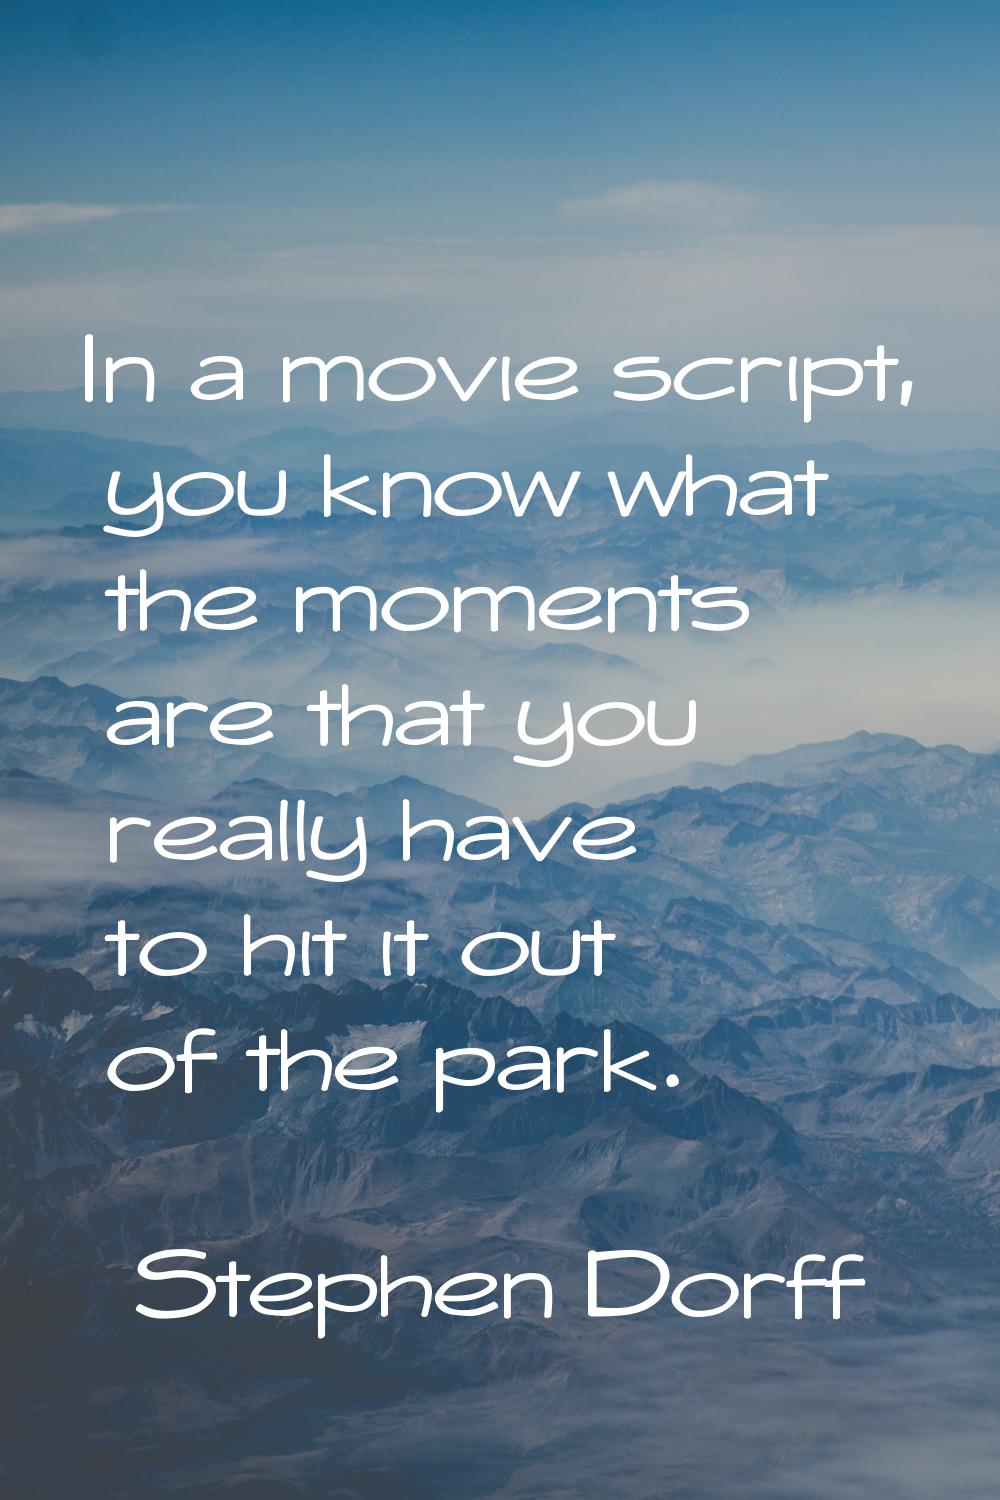 In a movie script, you know what the moments are that you really have to hit it out of the park.